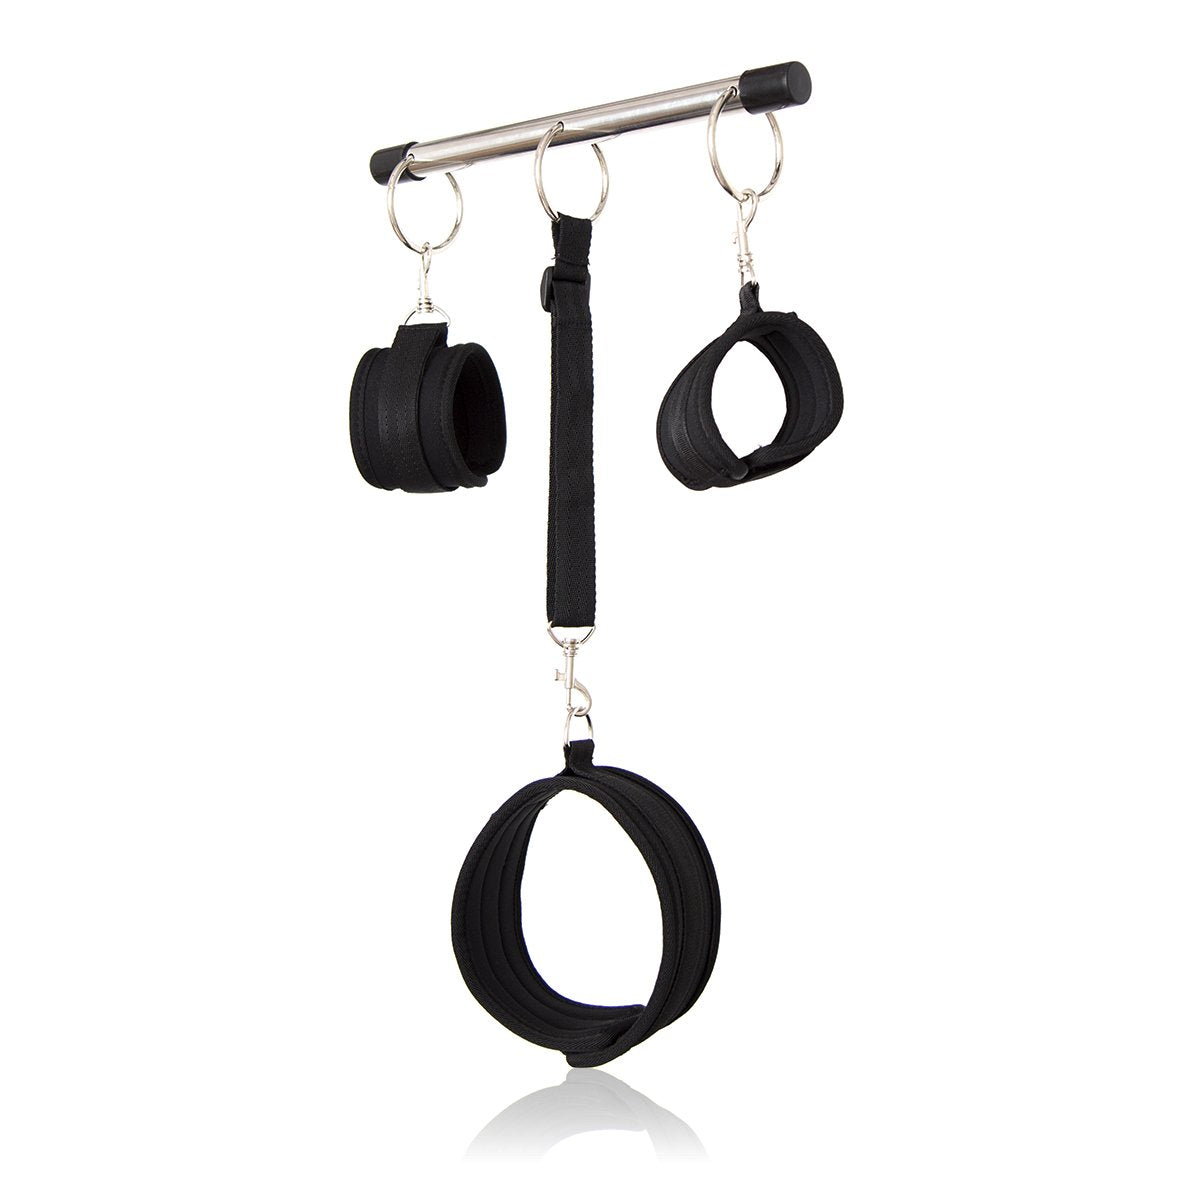 Black Color Spreader Bar Kit - Sexy.Delivery Sex Toys Delivery